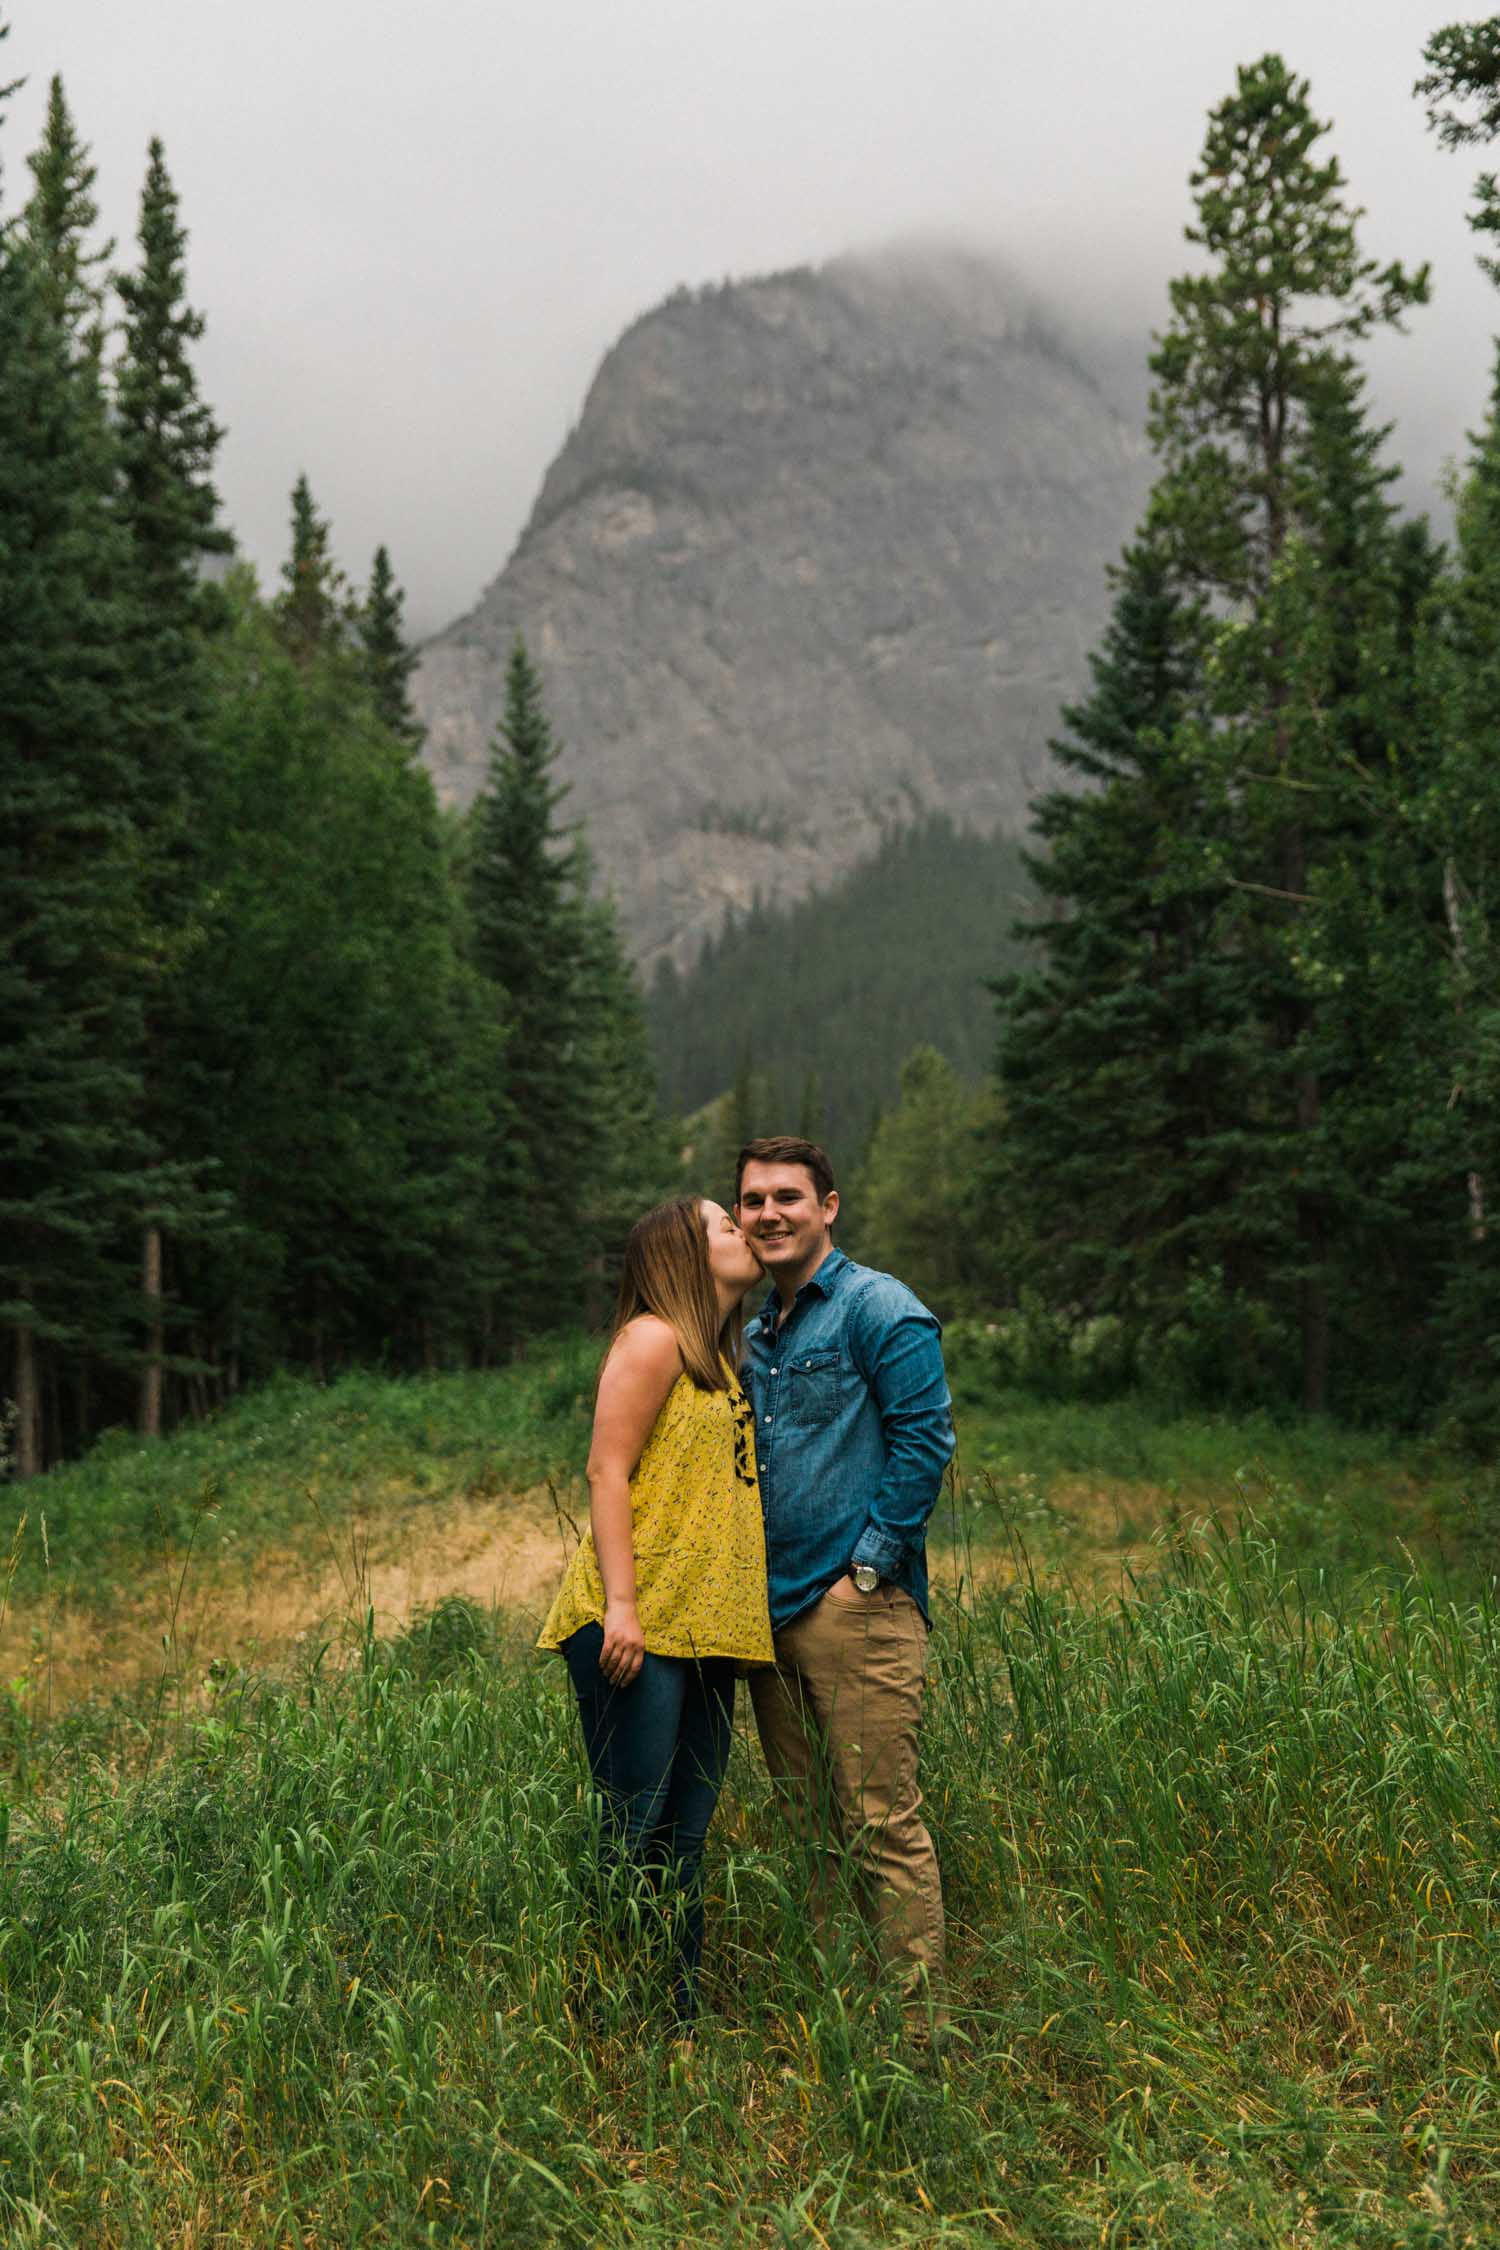 Camping on Vacation Engagement Photographer Jennie Guenard Photography